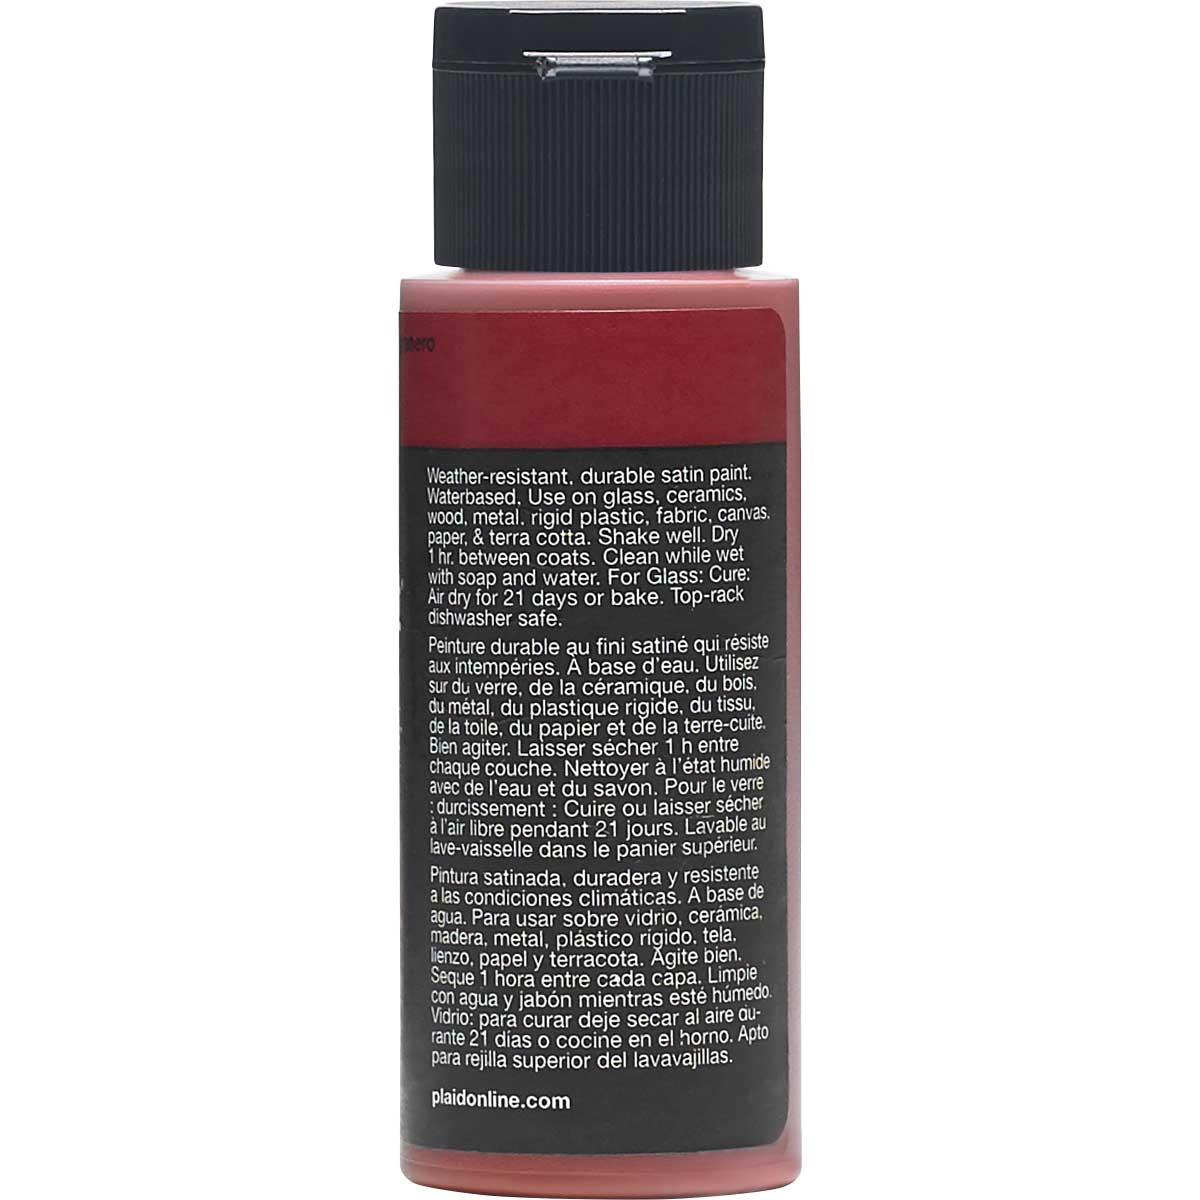 Delta Ceramcoat ® Select Multi-Surface Acrylic Paint - Satin - Barn Red, 2 oz. - 04006